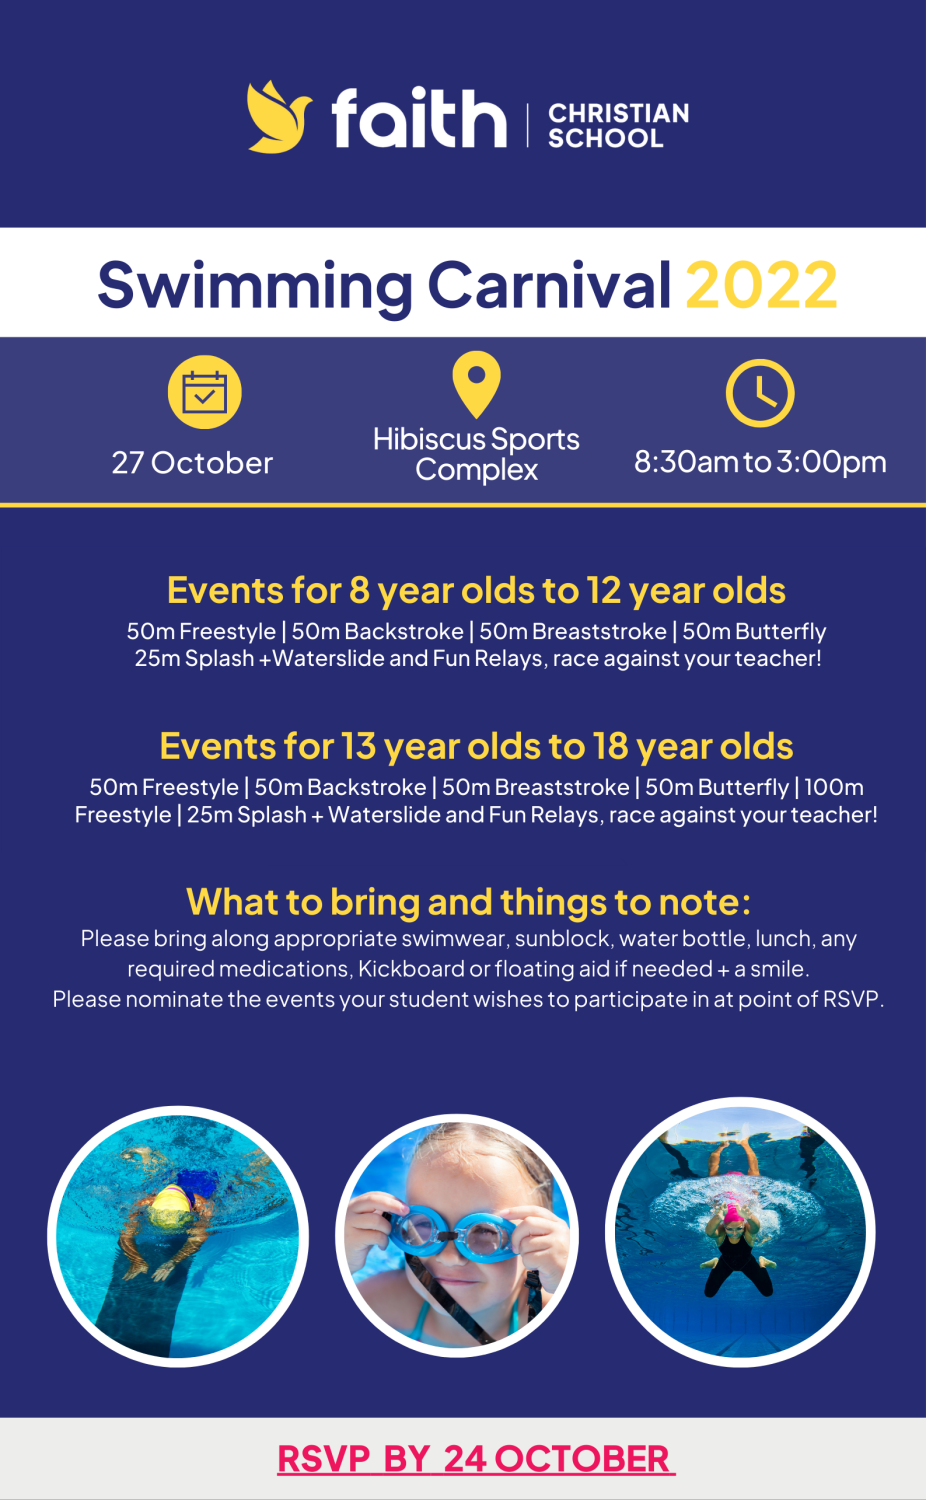 Swimming Carnival details